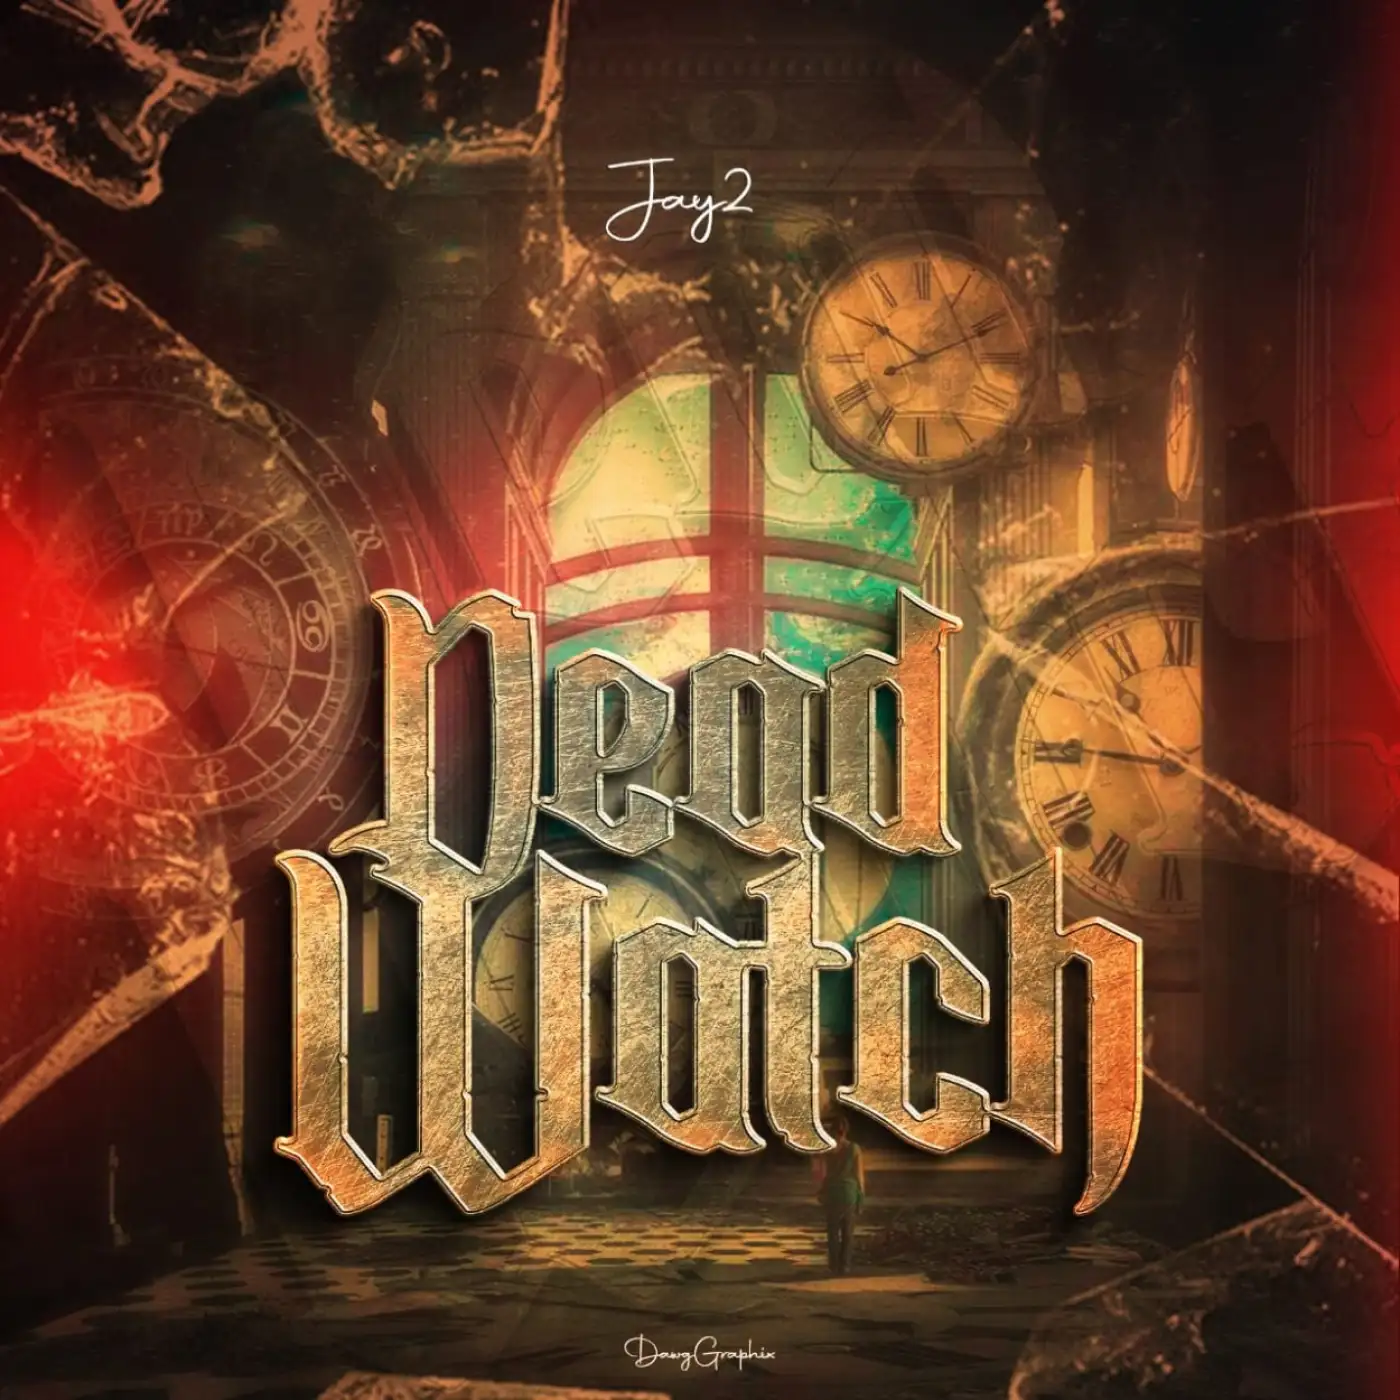 jay2-dead-watch-mp3-download-mp3 download